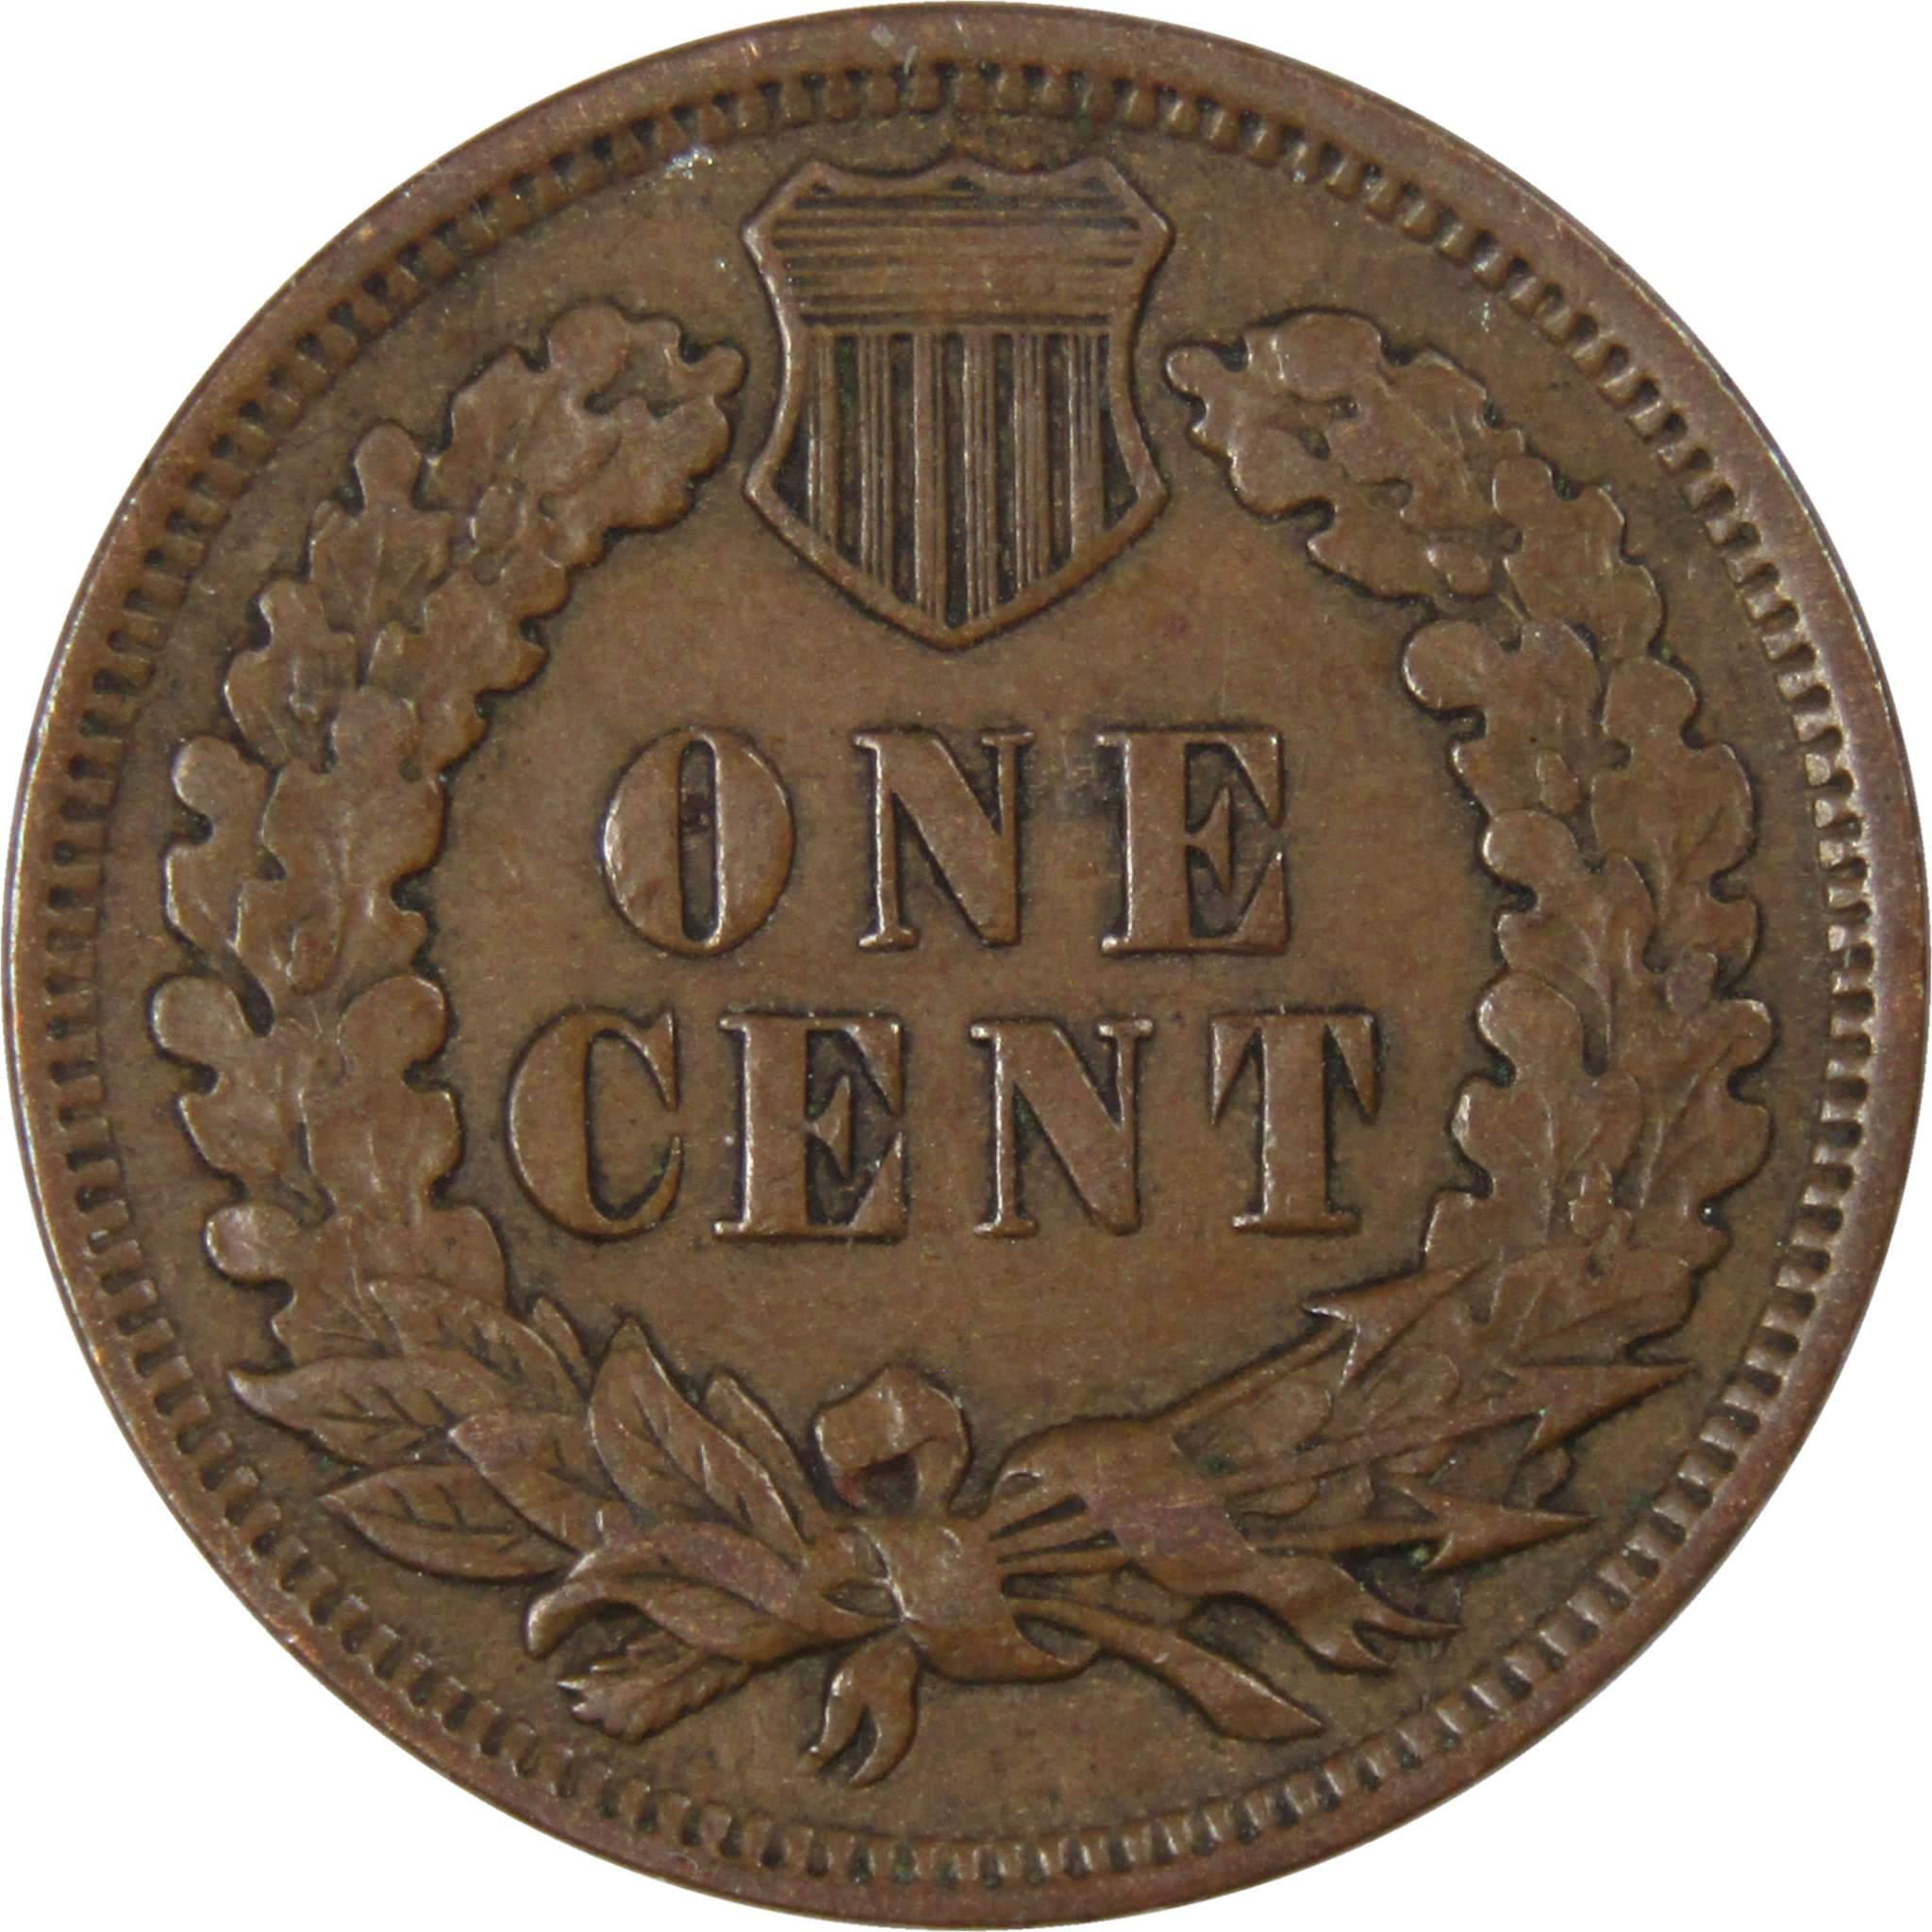 1906 Indian Head Cent XF EF Extremely Fine Bronze Penny 1c Coin Collectible